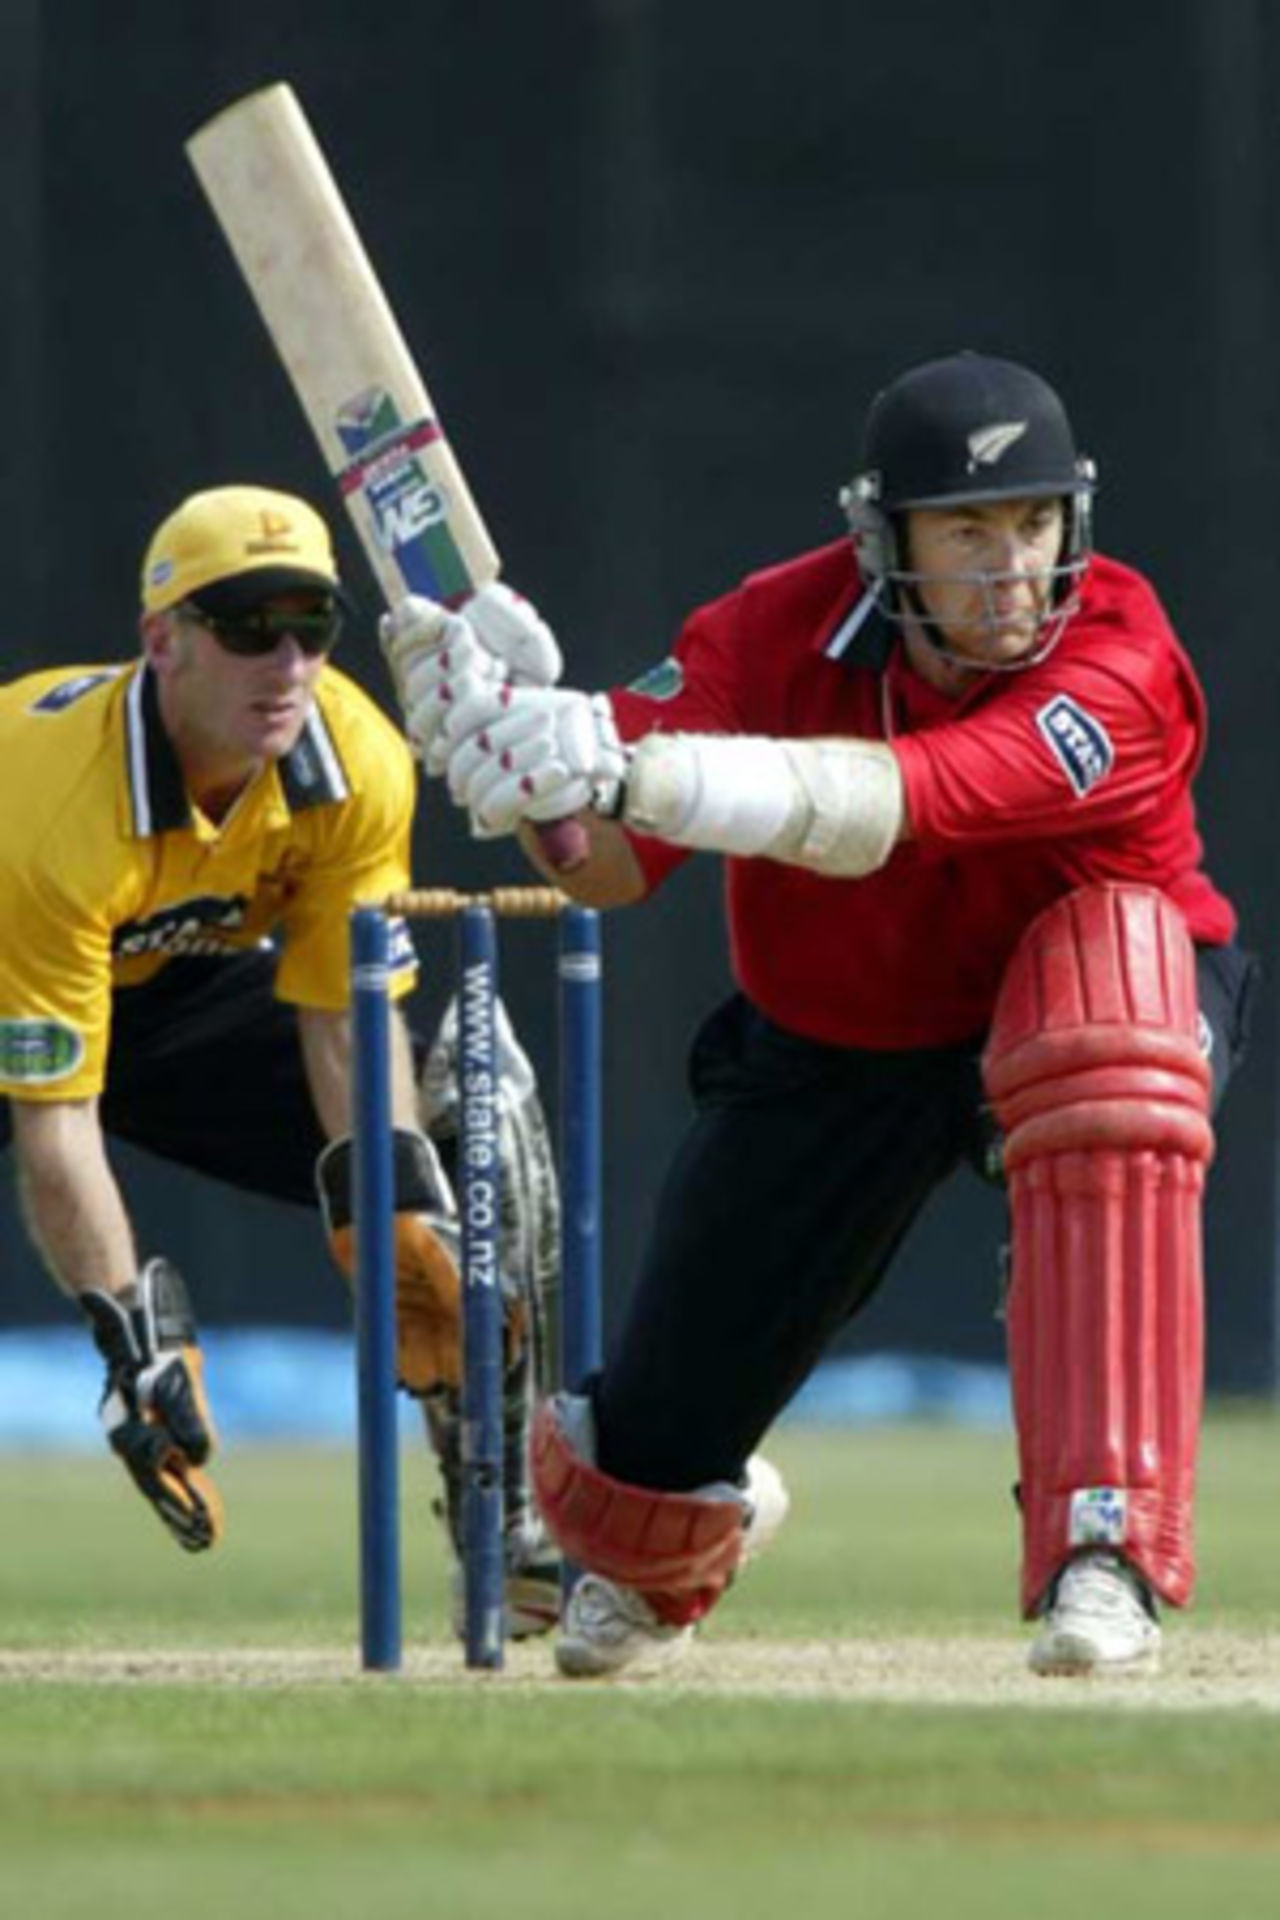 Canterbury batsman Craig McMillan sweeps a delivery during his innings of 122 not out as Wellington wicket-keeper Chris Nevin looks on. State Shield: Wellington v Canterbury at Basin Reserve, Wellington, 19 January 2003.